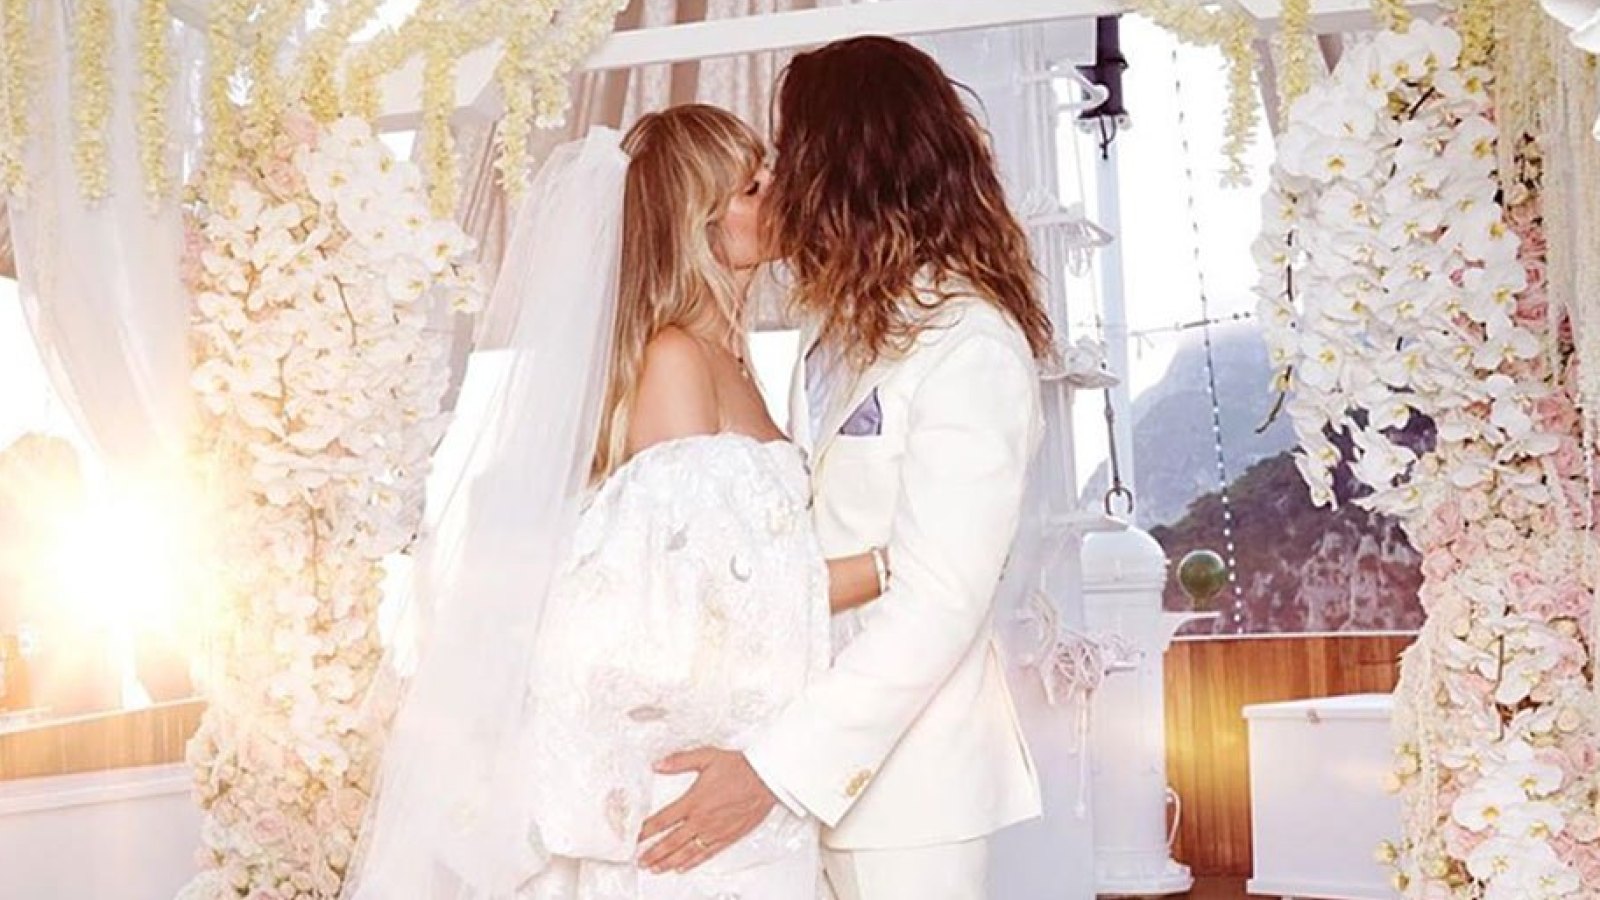 Heidi Klum finally reveals who designed her Bridal Gown in her Dreamy ...